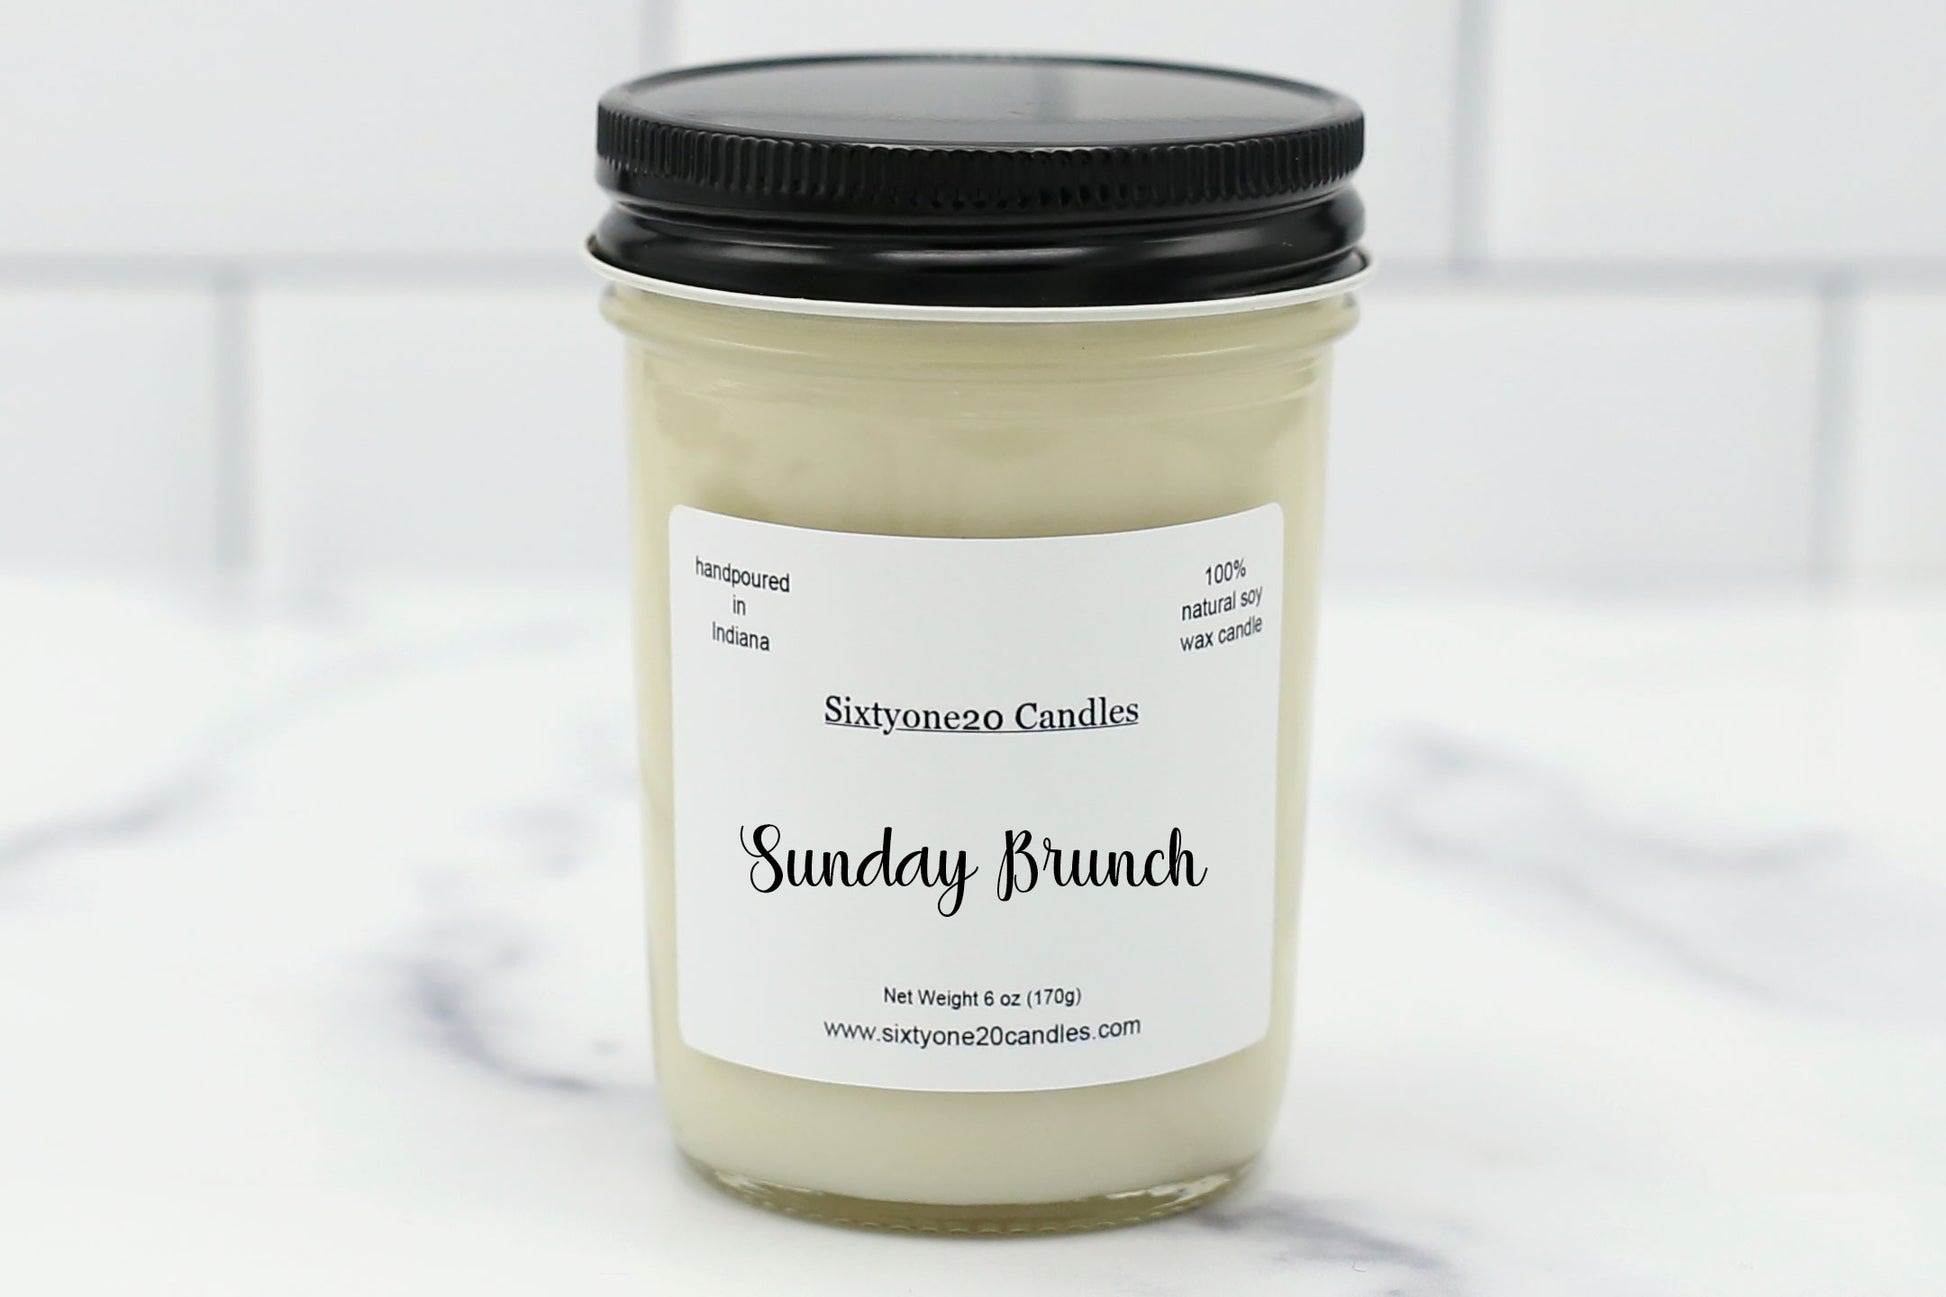 Sunday Brunch 100% soy wax candle